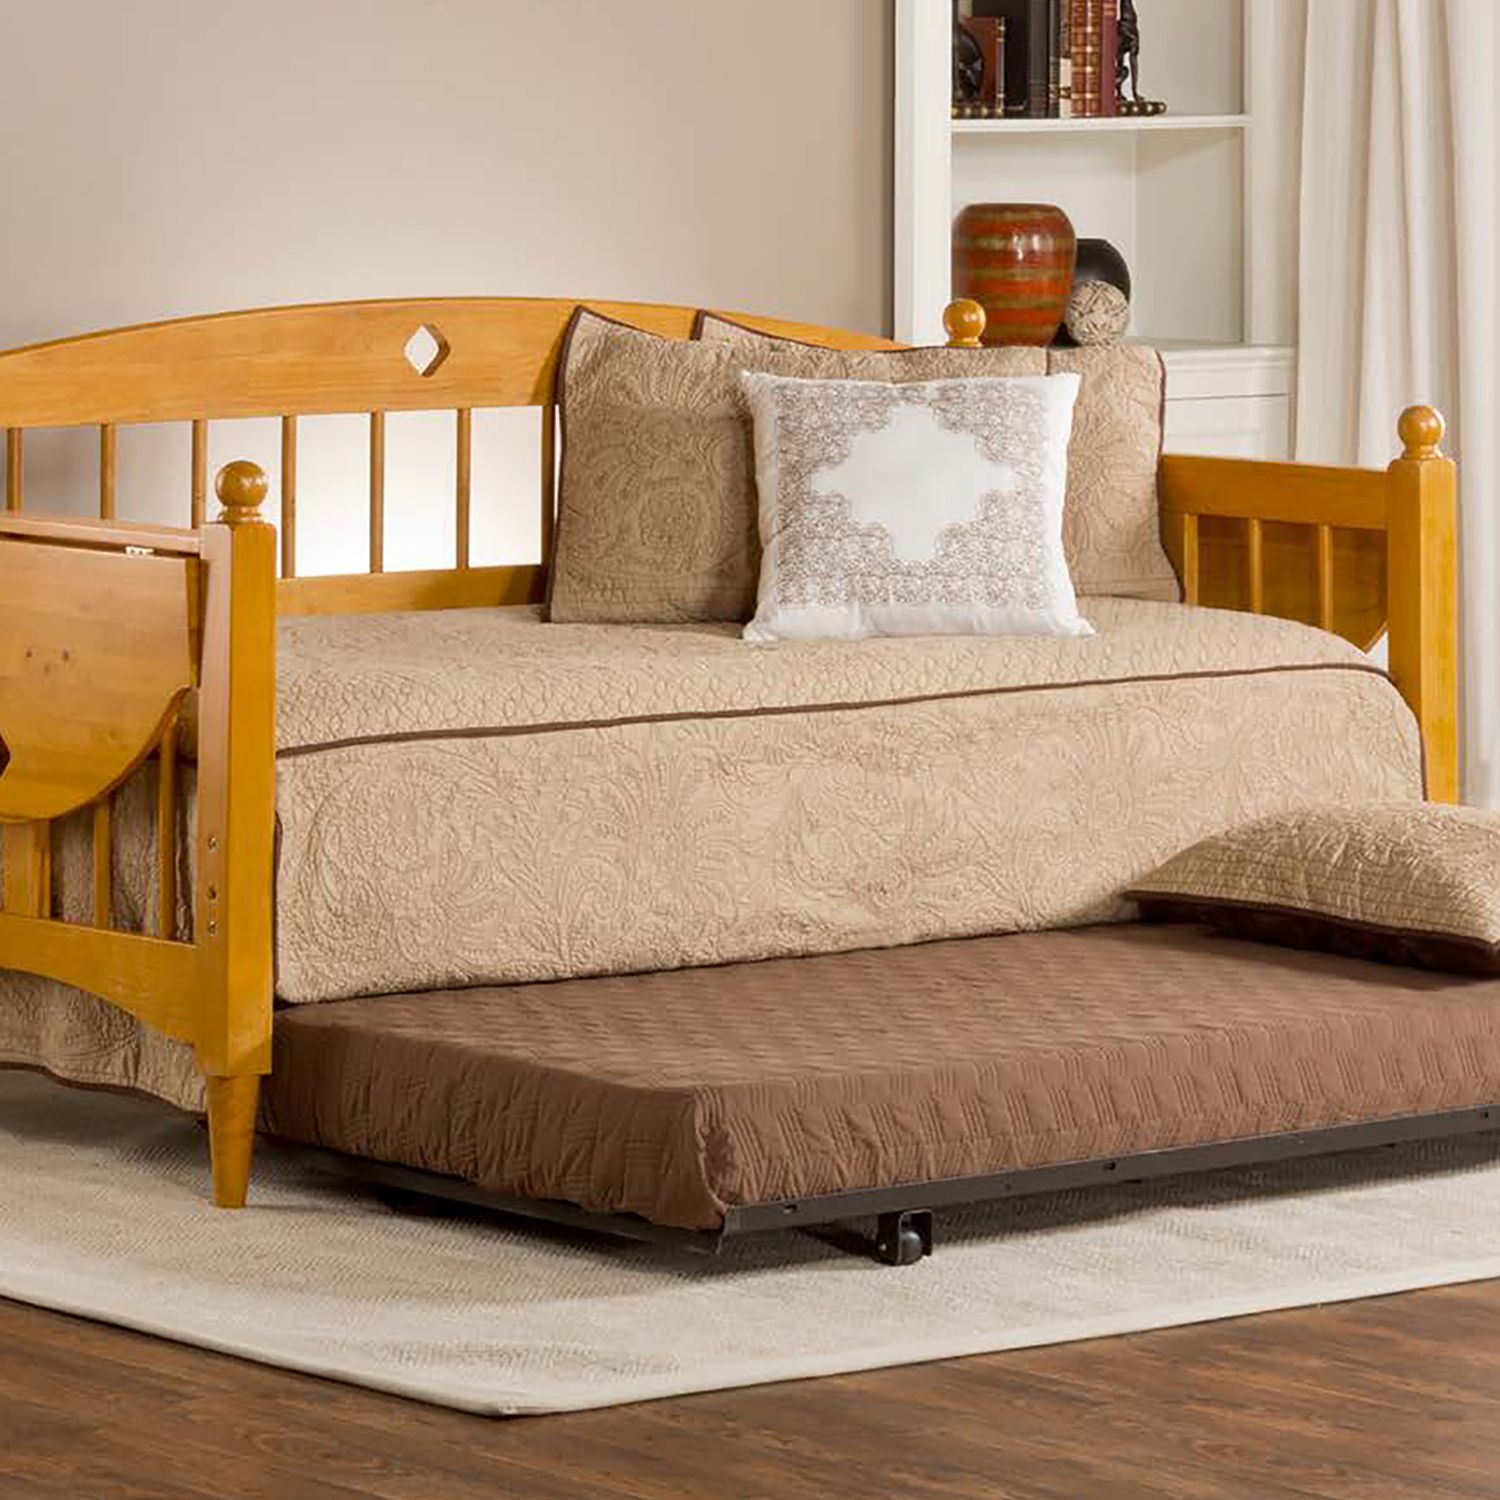 Image for Hillsdale Furniture Dalton Daybed & Trundle at Kohl's.